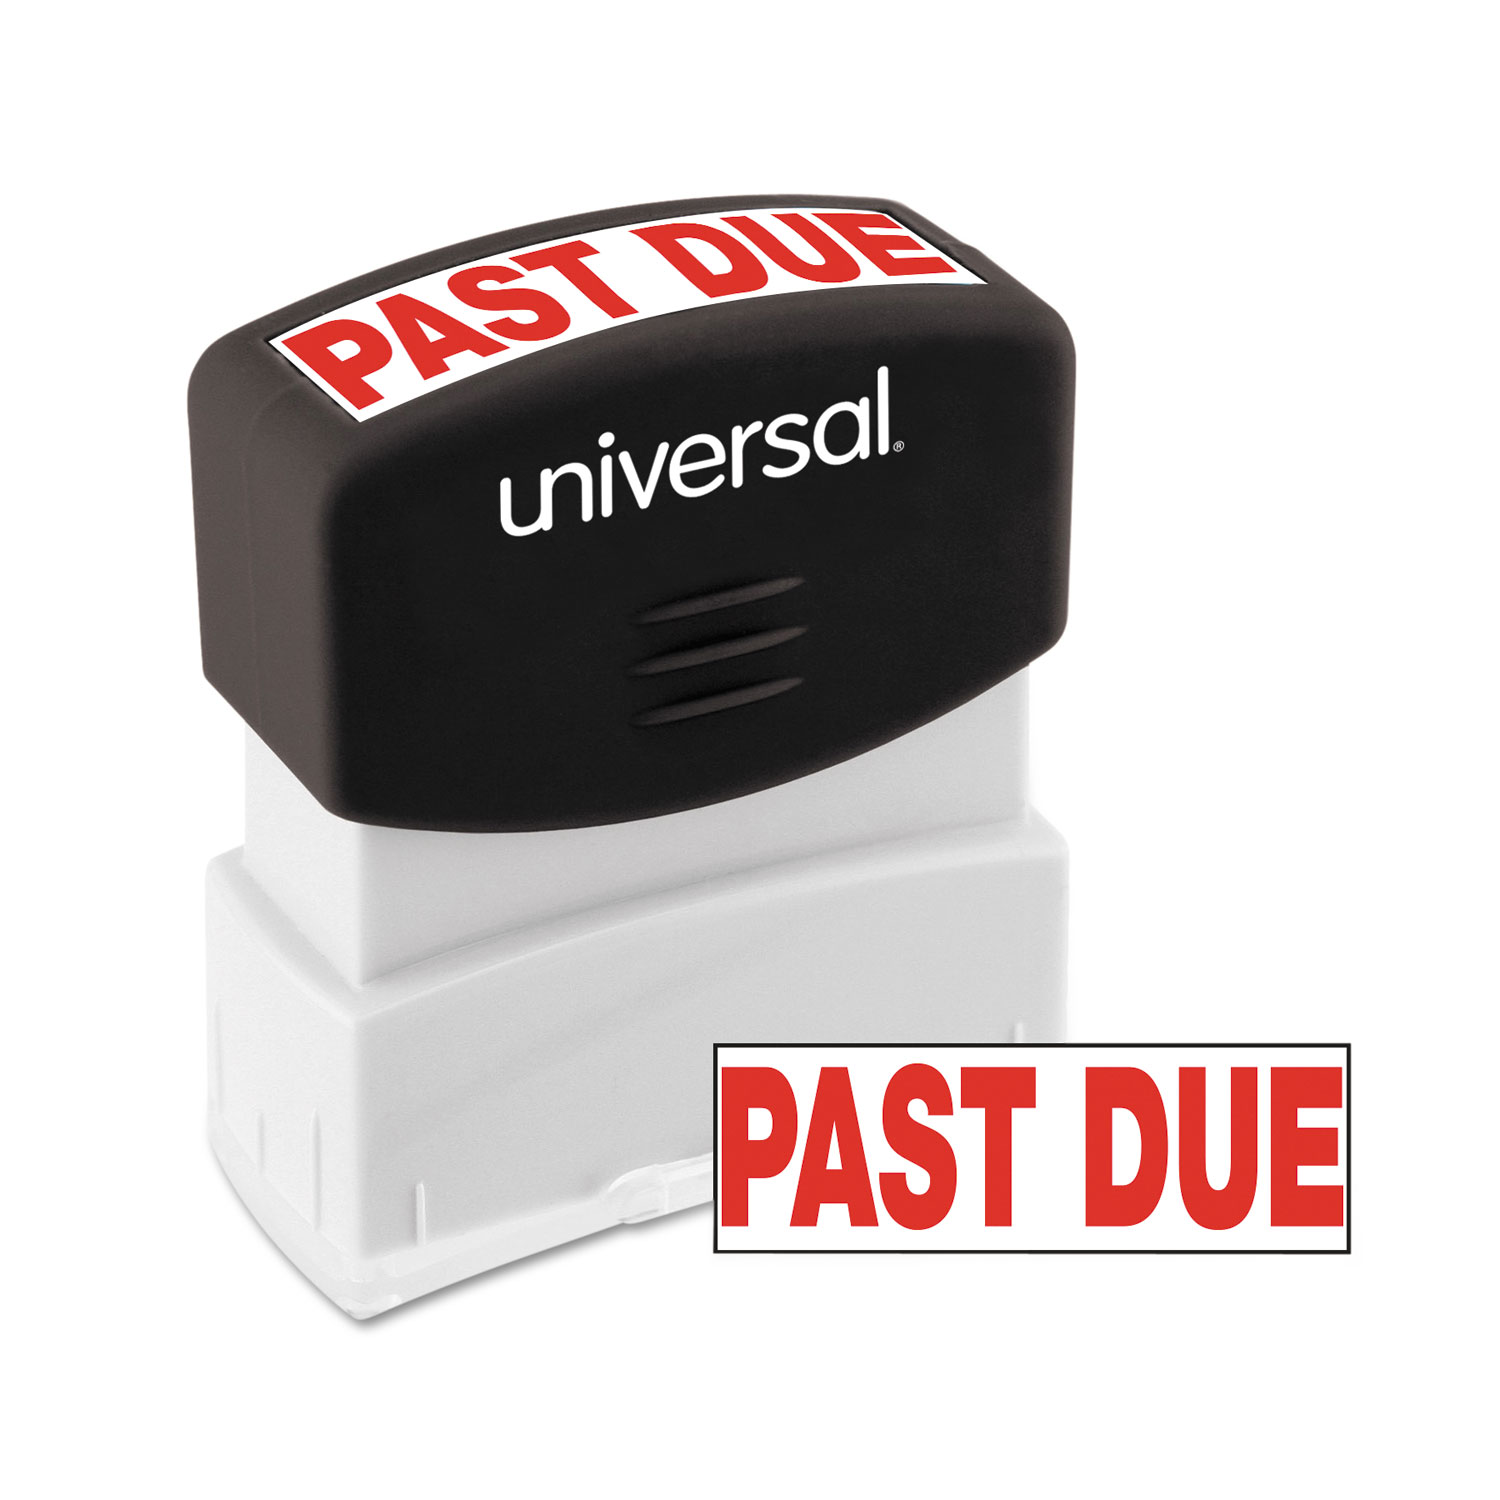  Universal UNV10063 Message Stamp, PAST DUE, Pre-Inked One-Color, Red (UNV10063) 